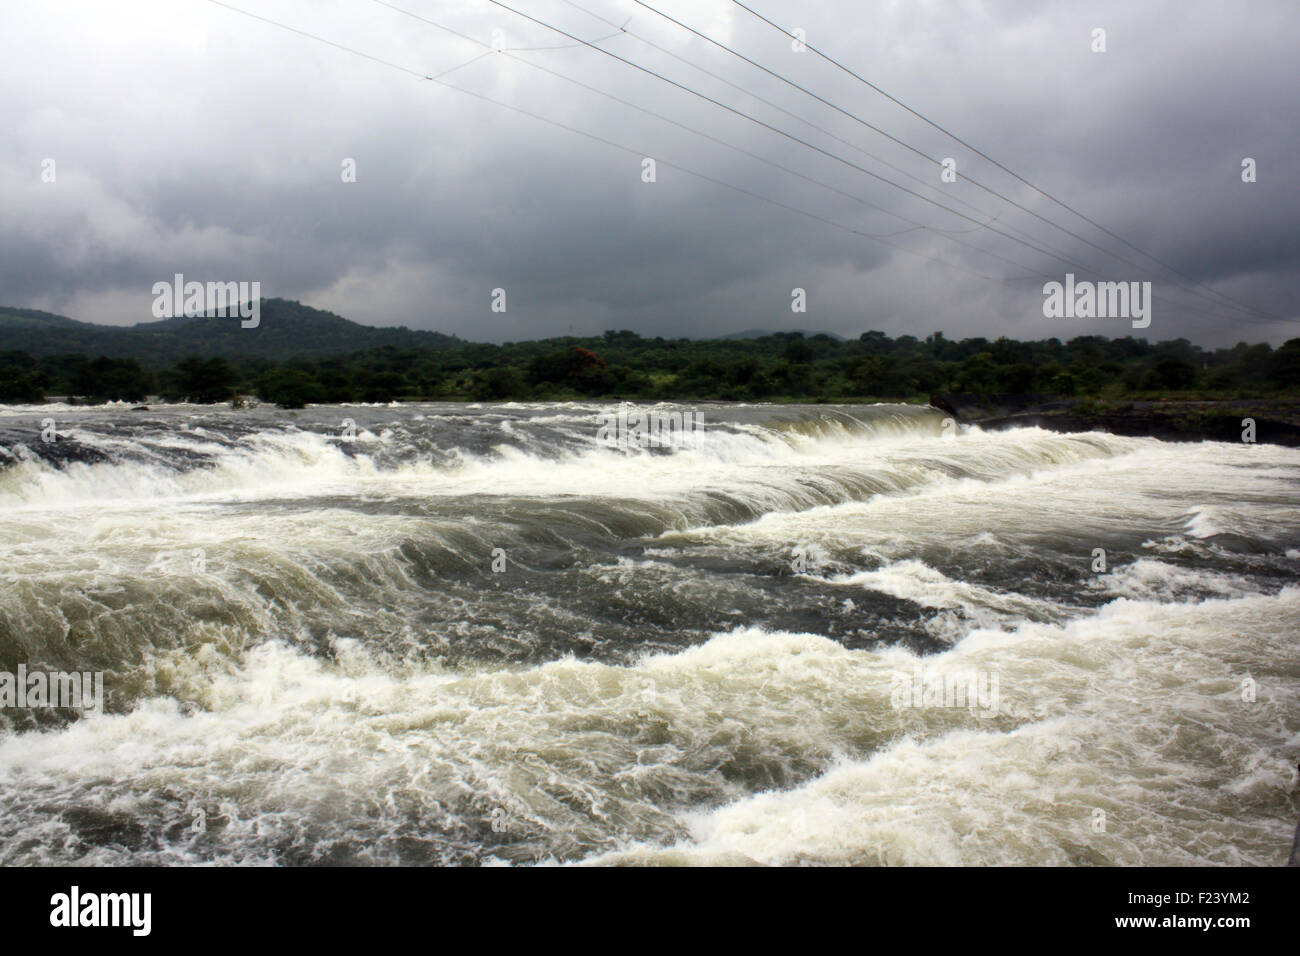 A background with a view of gushing water during the floods in India. Stock Photo